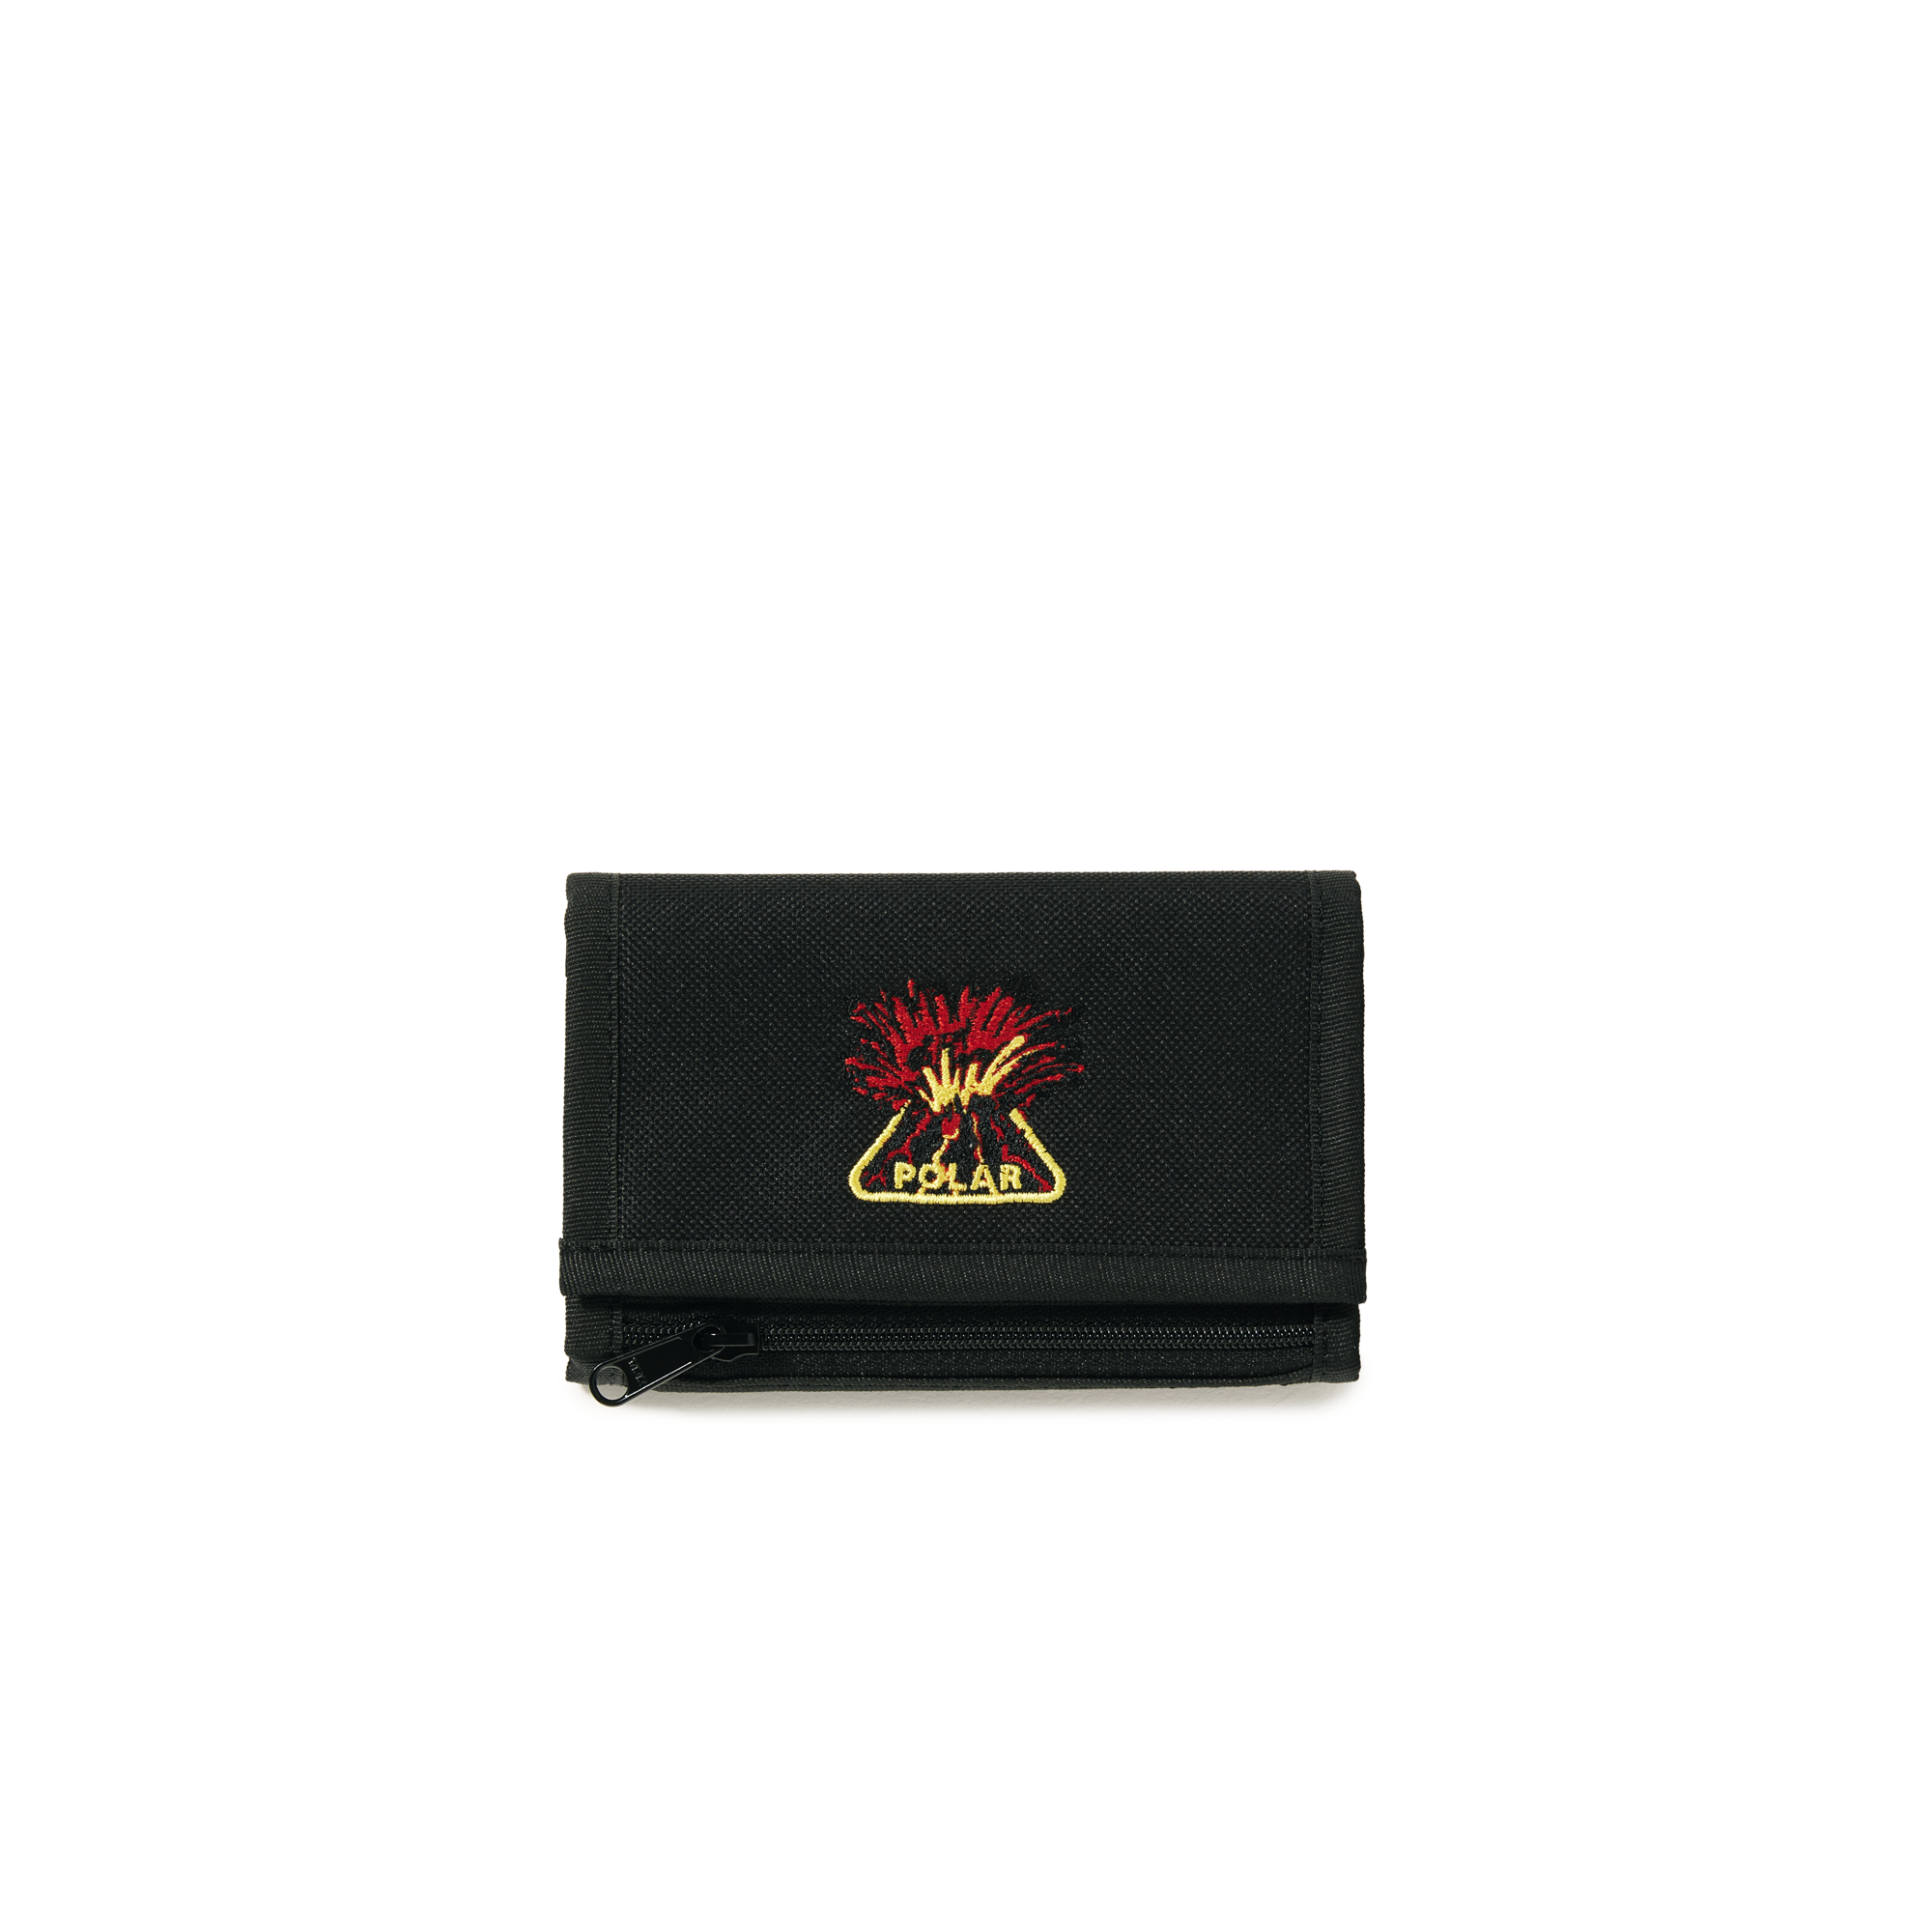 Black polar velcro wallet with red volcano logo on front. Card and cash pockets inside. Free uk shipping on orders over £50